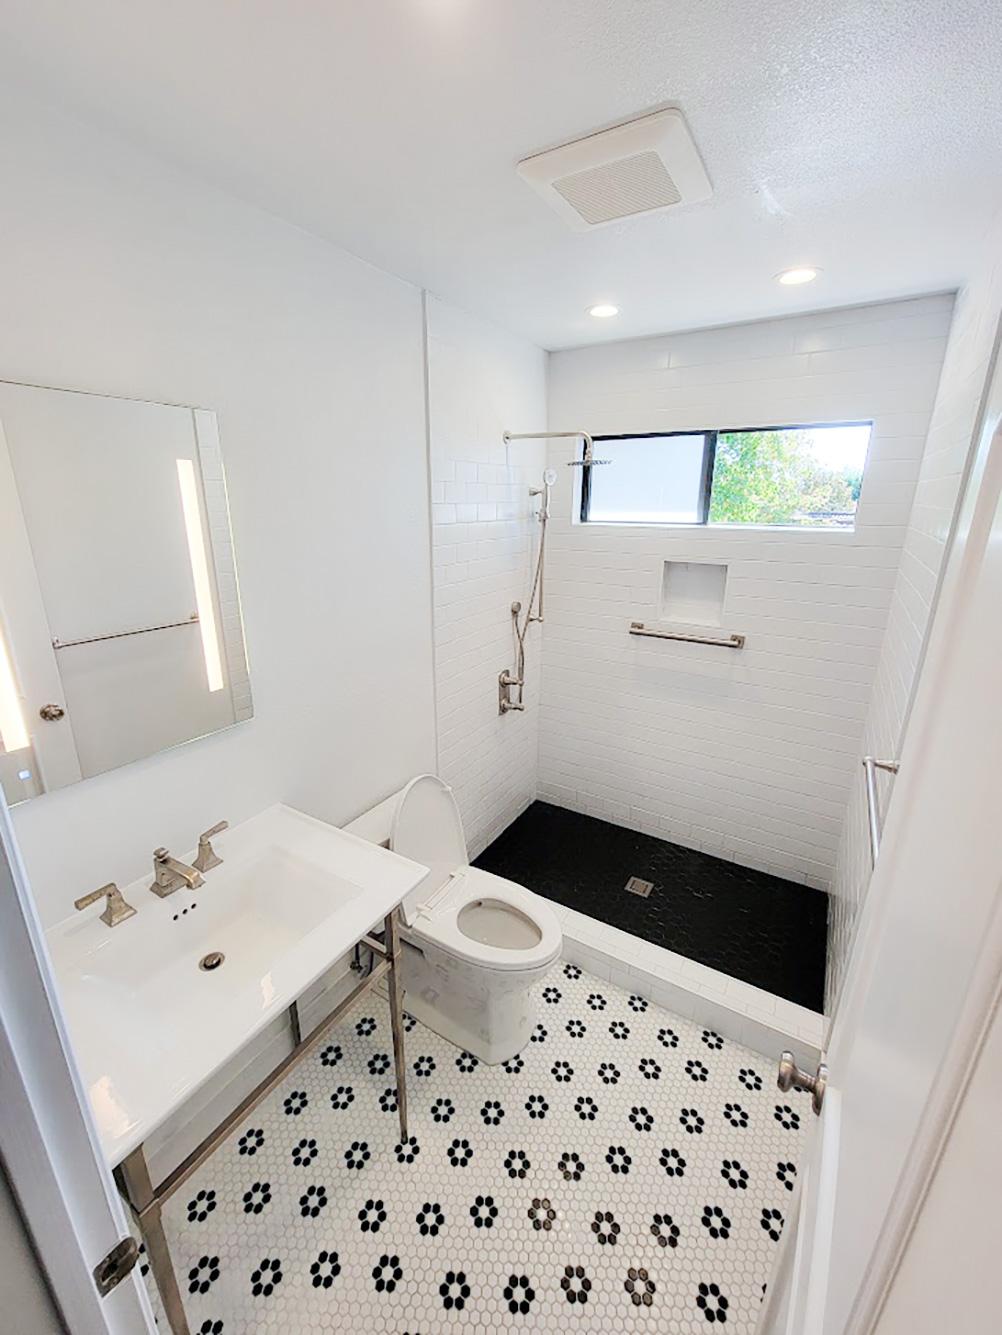 Picture of J A Serrano Construction remodeled this bathroom in American Canyon. - J A Serrano Construction